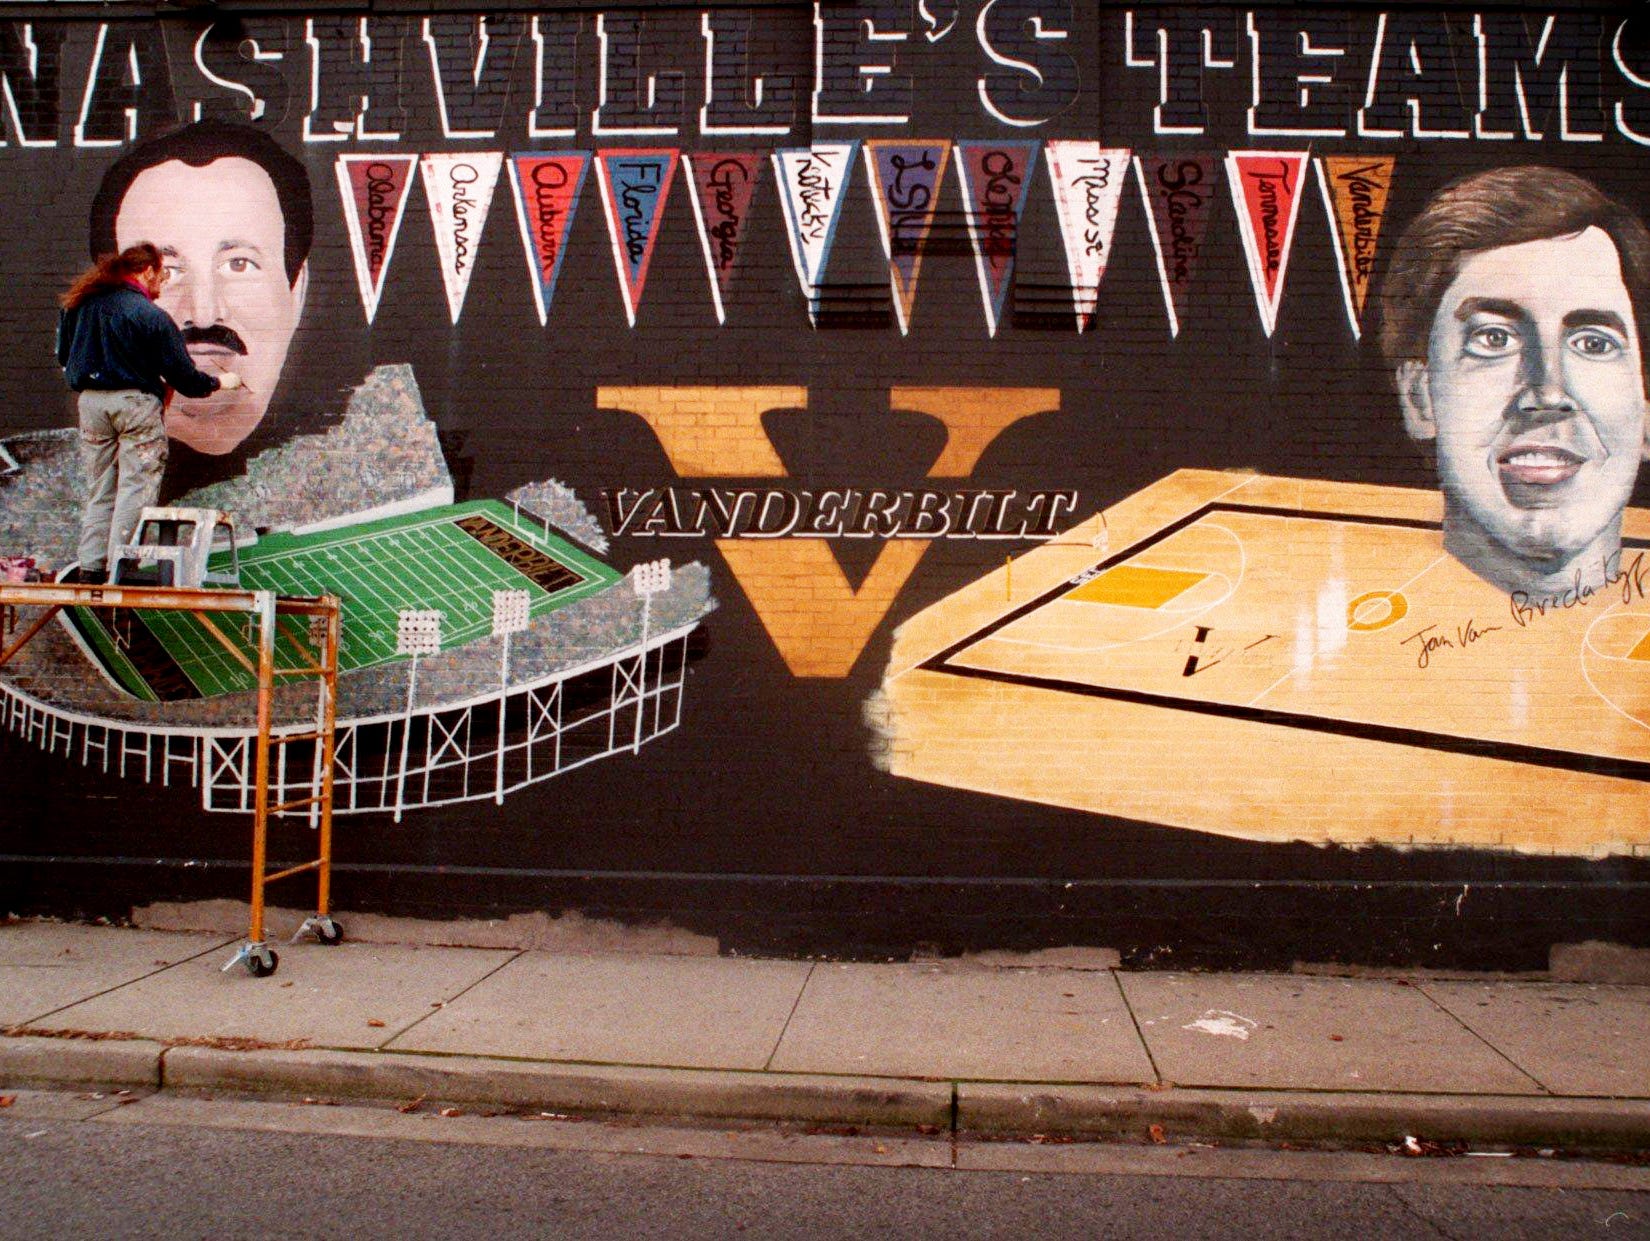 In 1996 Michael Cooper painted football coach Woody Widenhofer on the Vanderbilt mural on the wall of the building, which at the time was occupied by You Greek Me Greek.